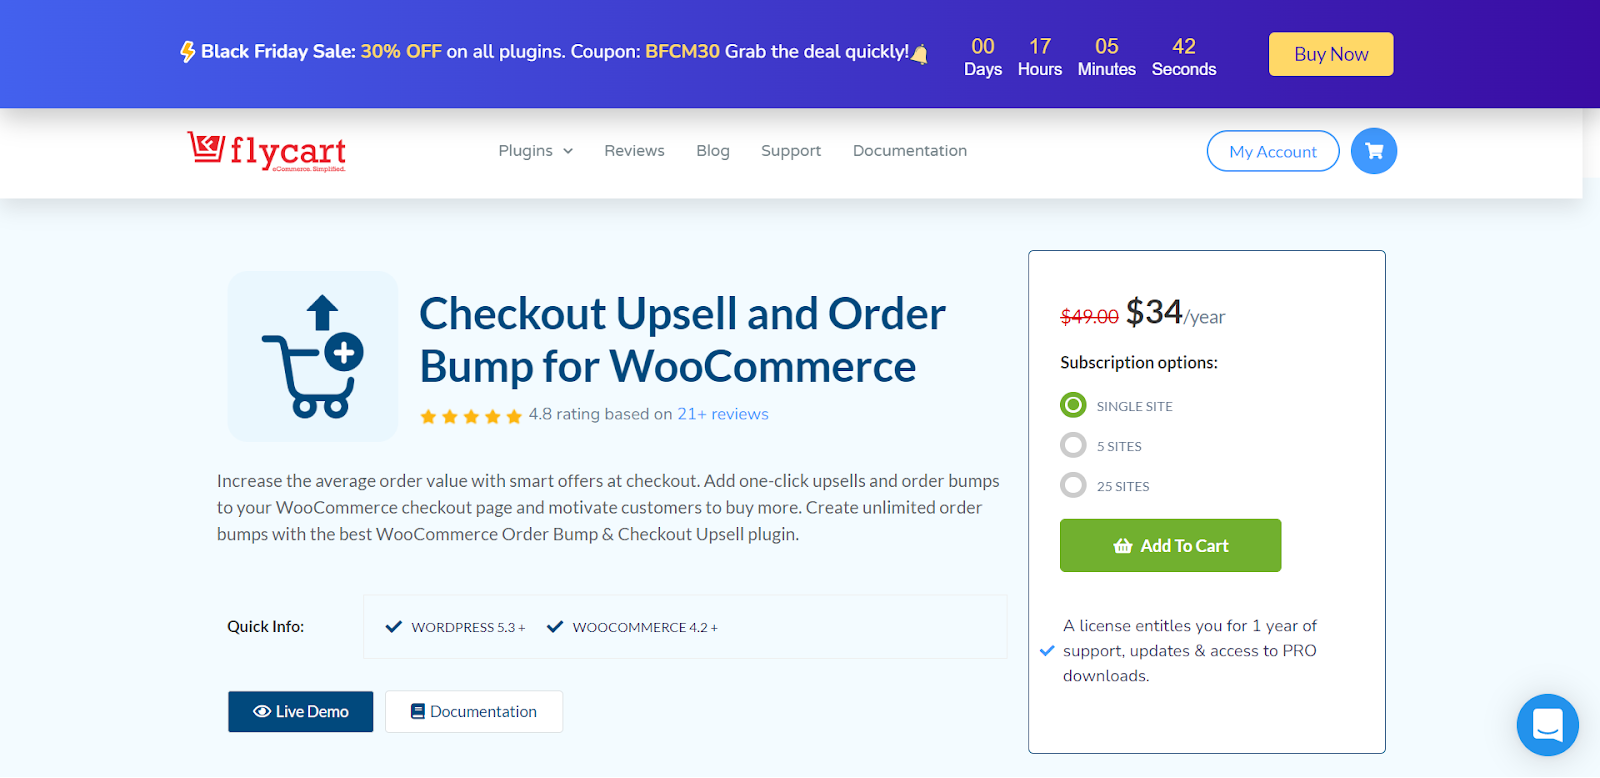 Checkout Upsell and Order Bump for WooCommerce plugin